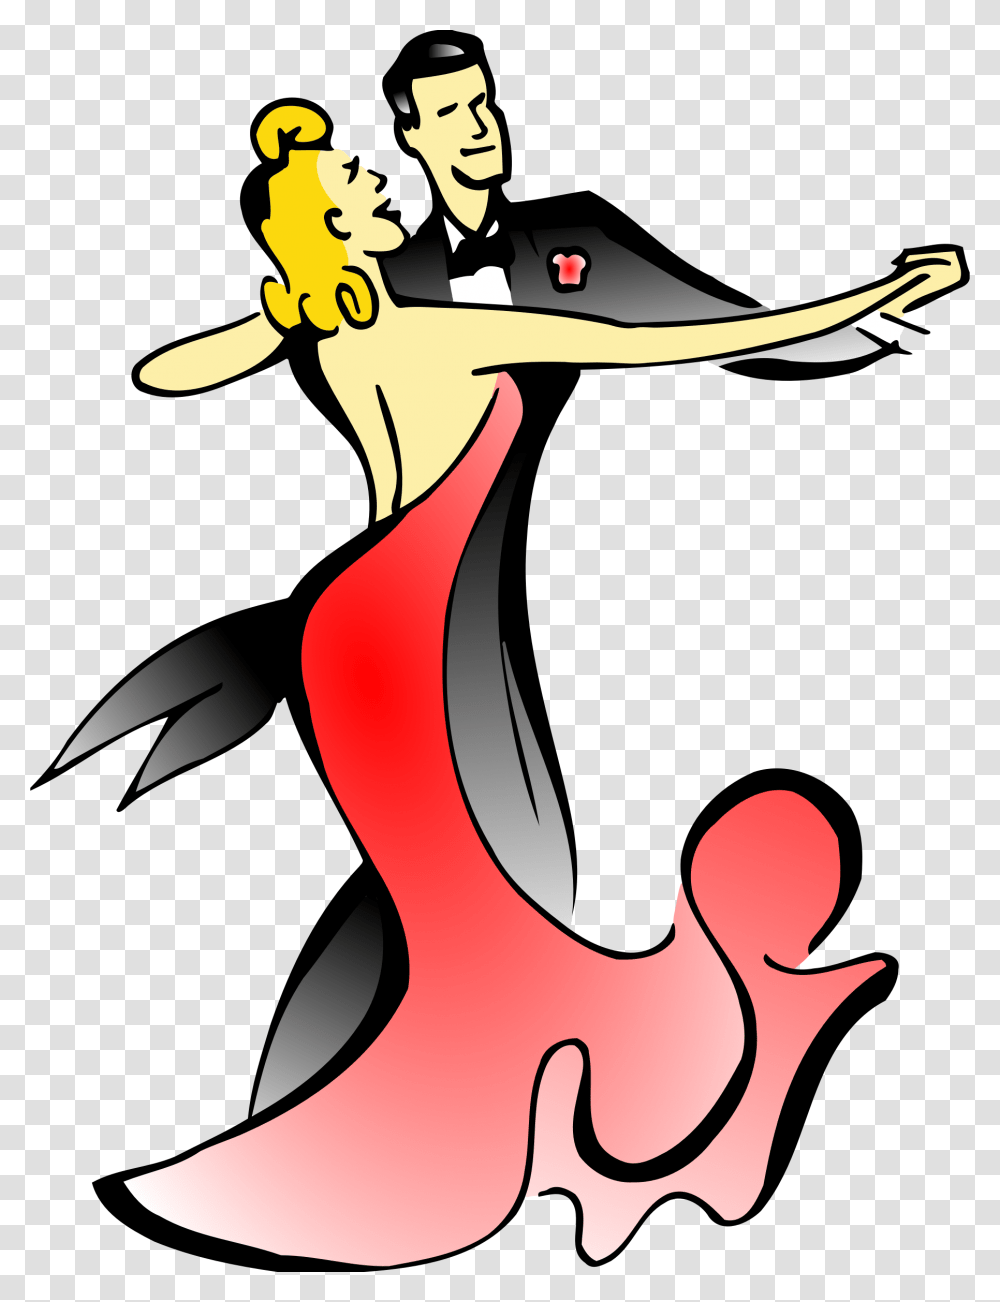 Ballroom Dancers Vector Clipart Image, Flame, Fire, Leisure Activities, Dance Pose Transparent Png